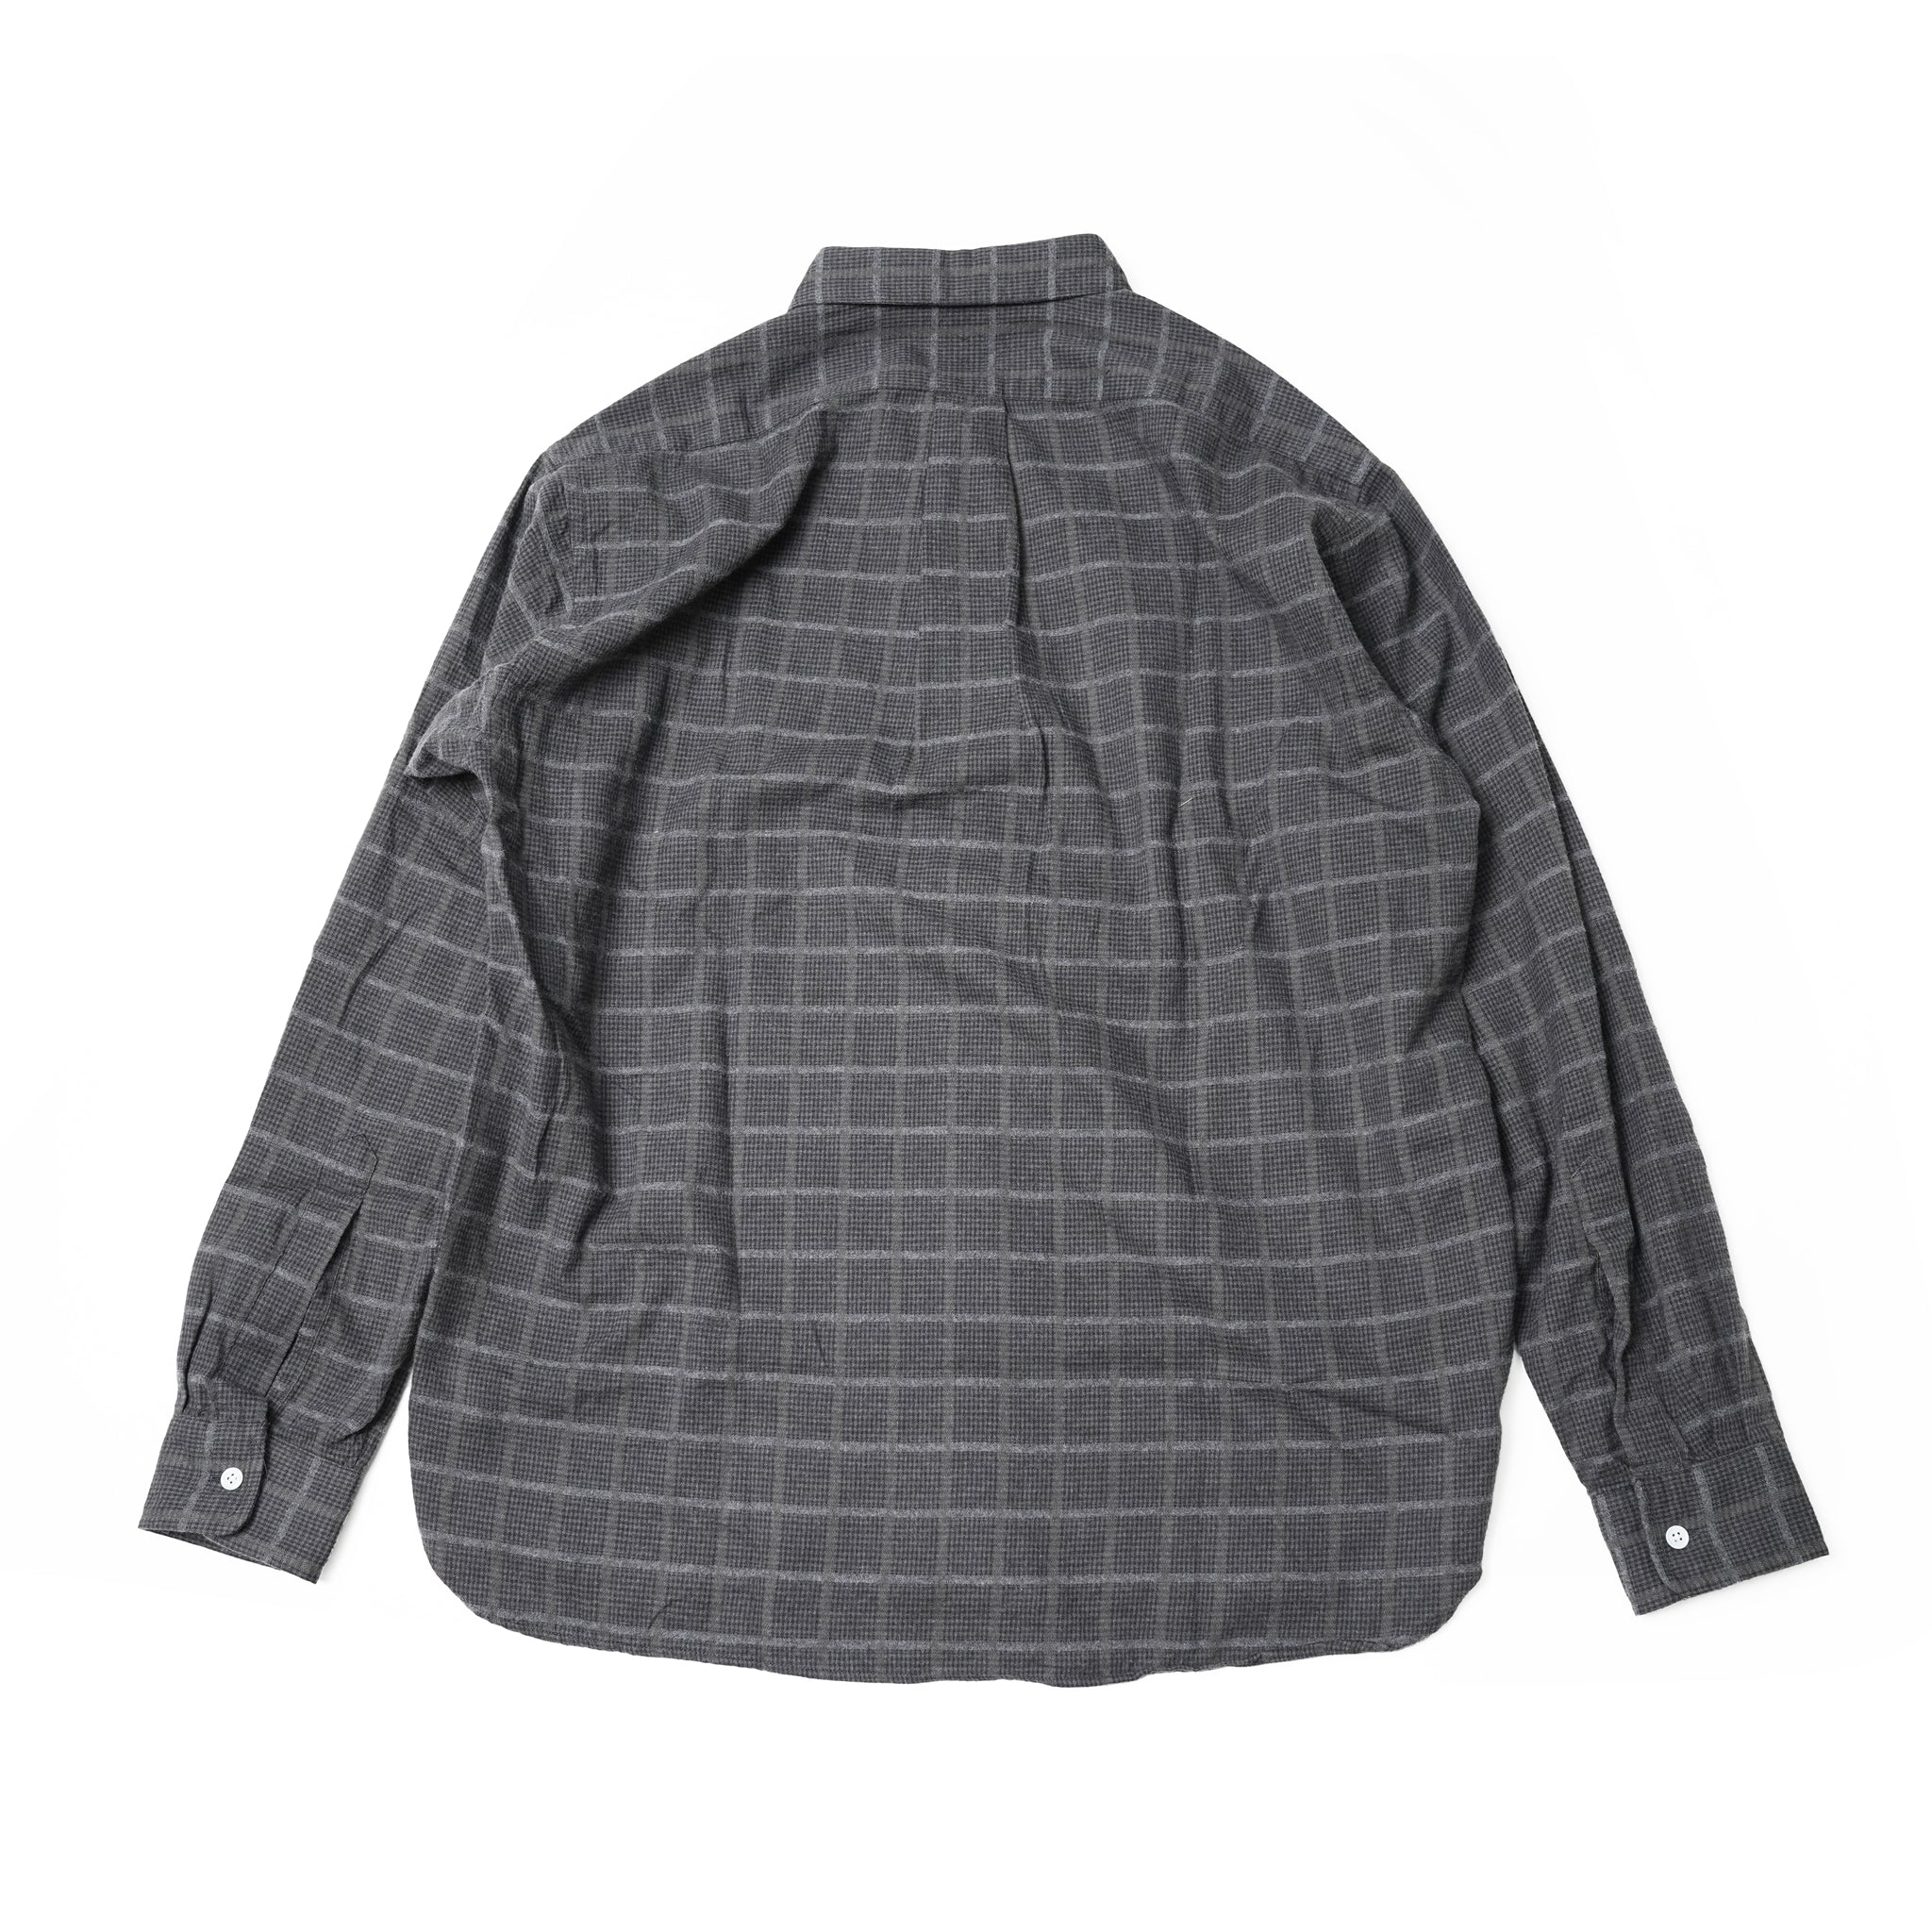 Name: BD SHIRTS | Color:Chacoal Check | Size:Regular/Tall 【CITYLIGHTS PRODUCTS_シティライツプロダクツ】